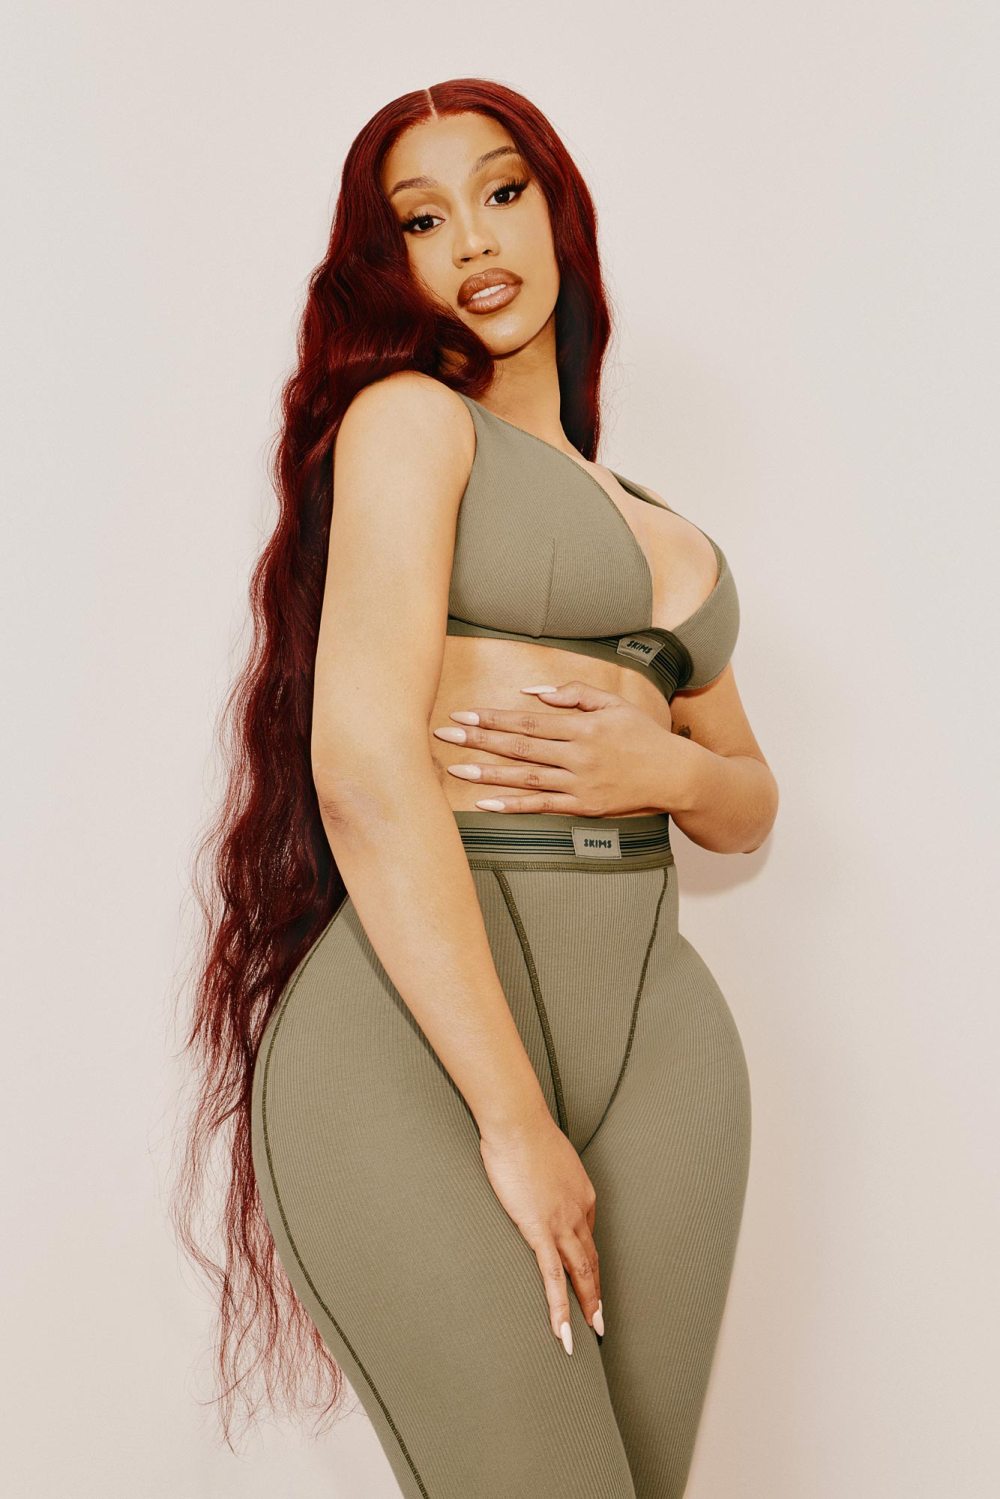 athos stavrou recommends cardi b sexy pictures pic